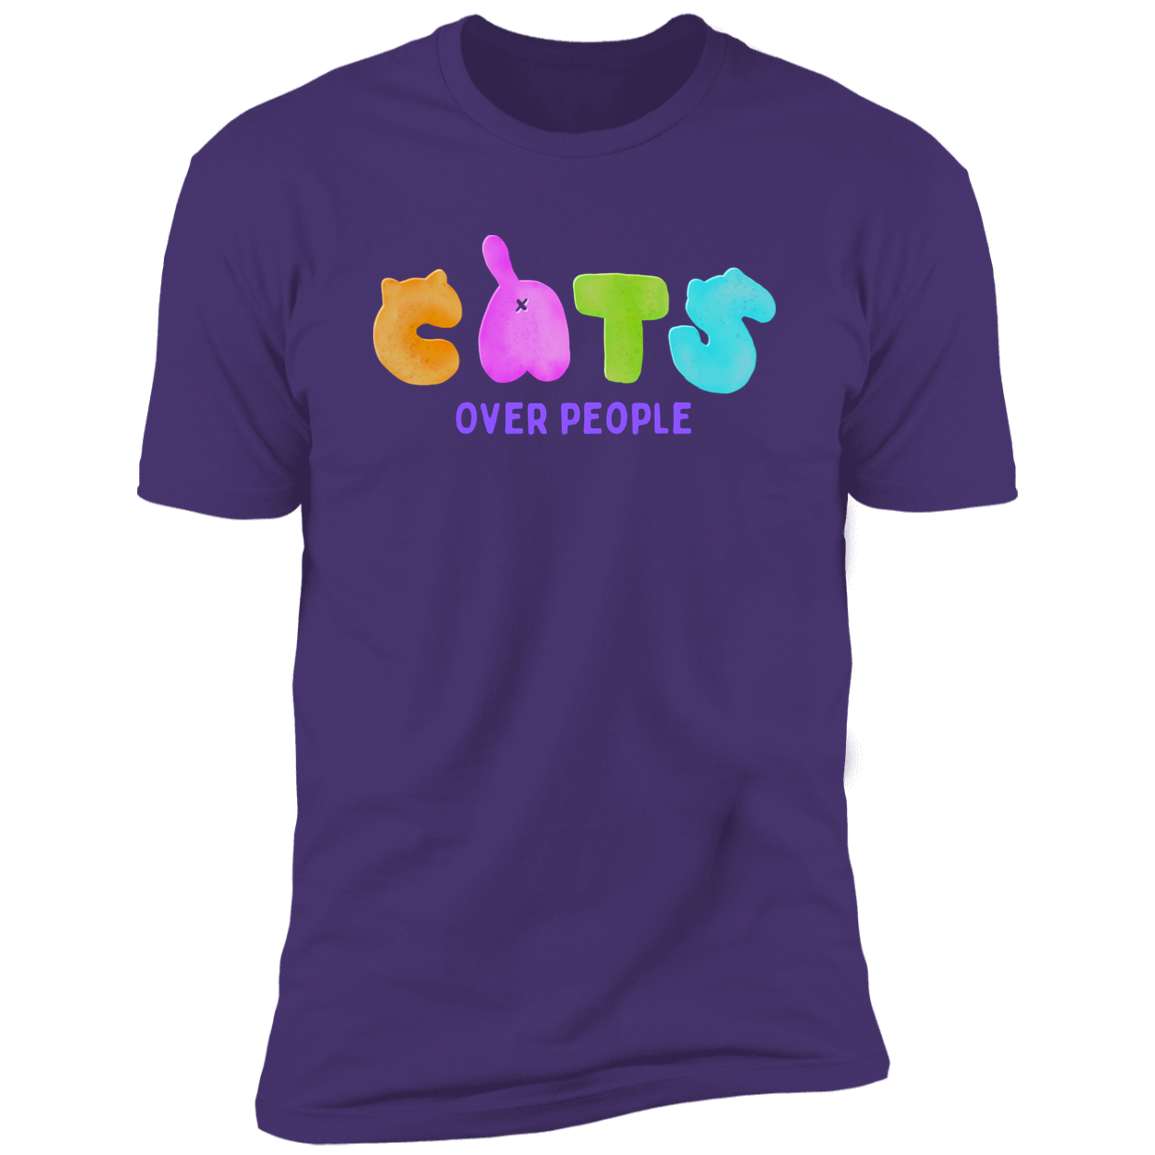 Cats Over People T-shirt, Cat Shirt for humans, in purple rush